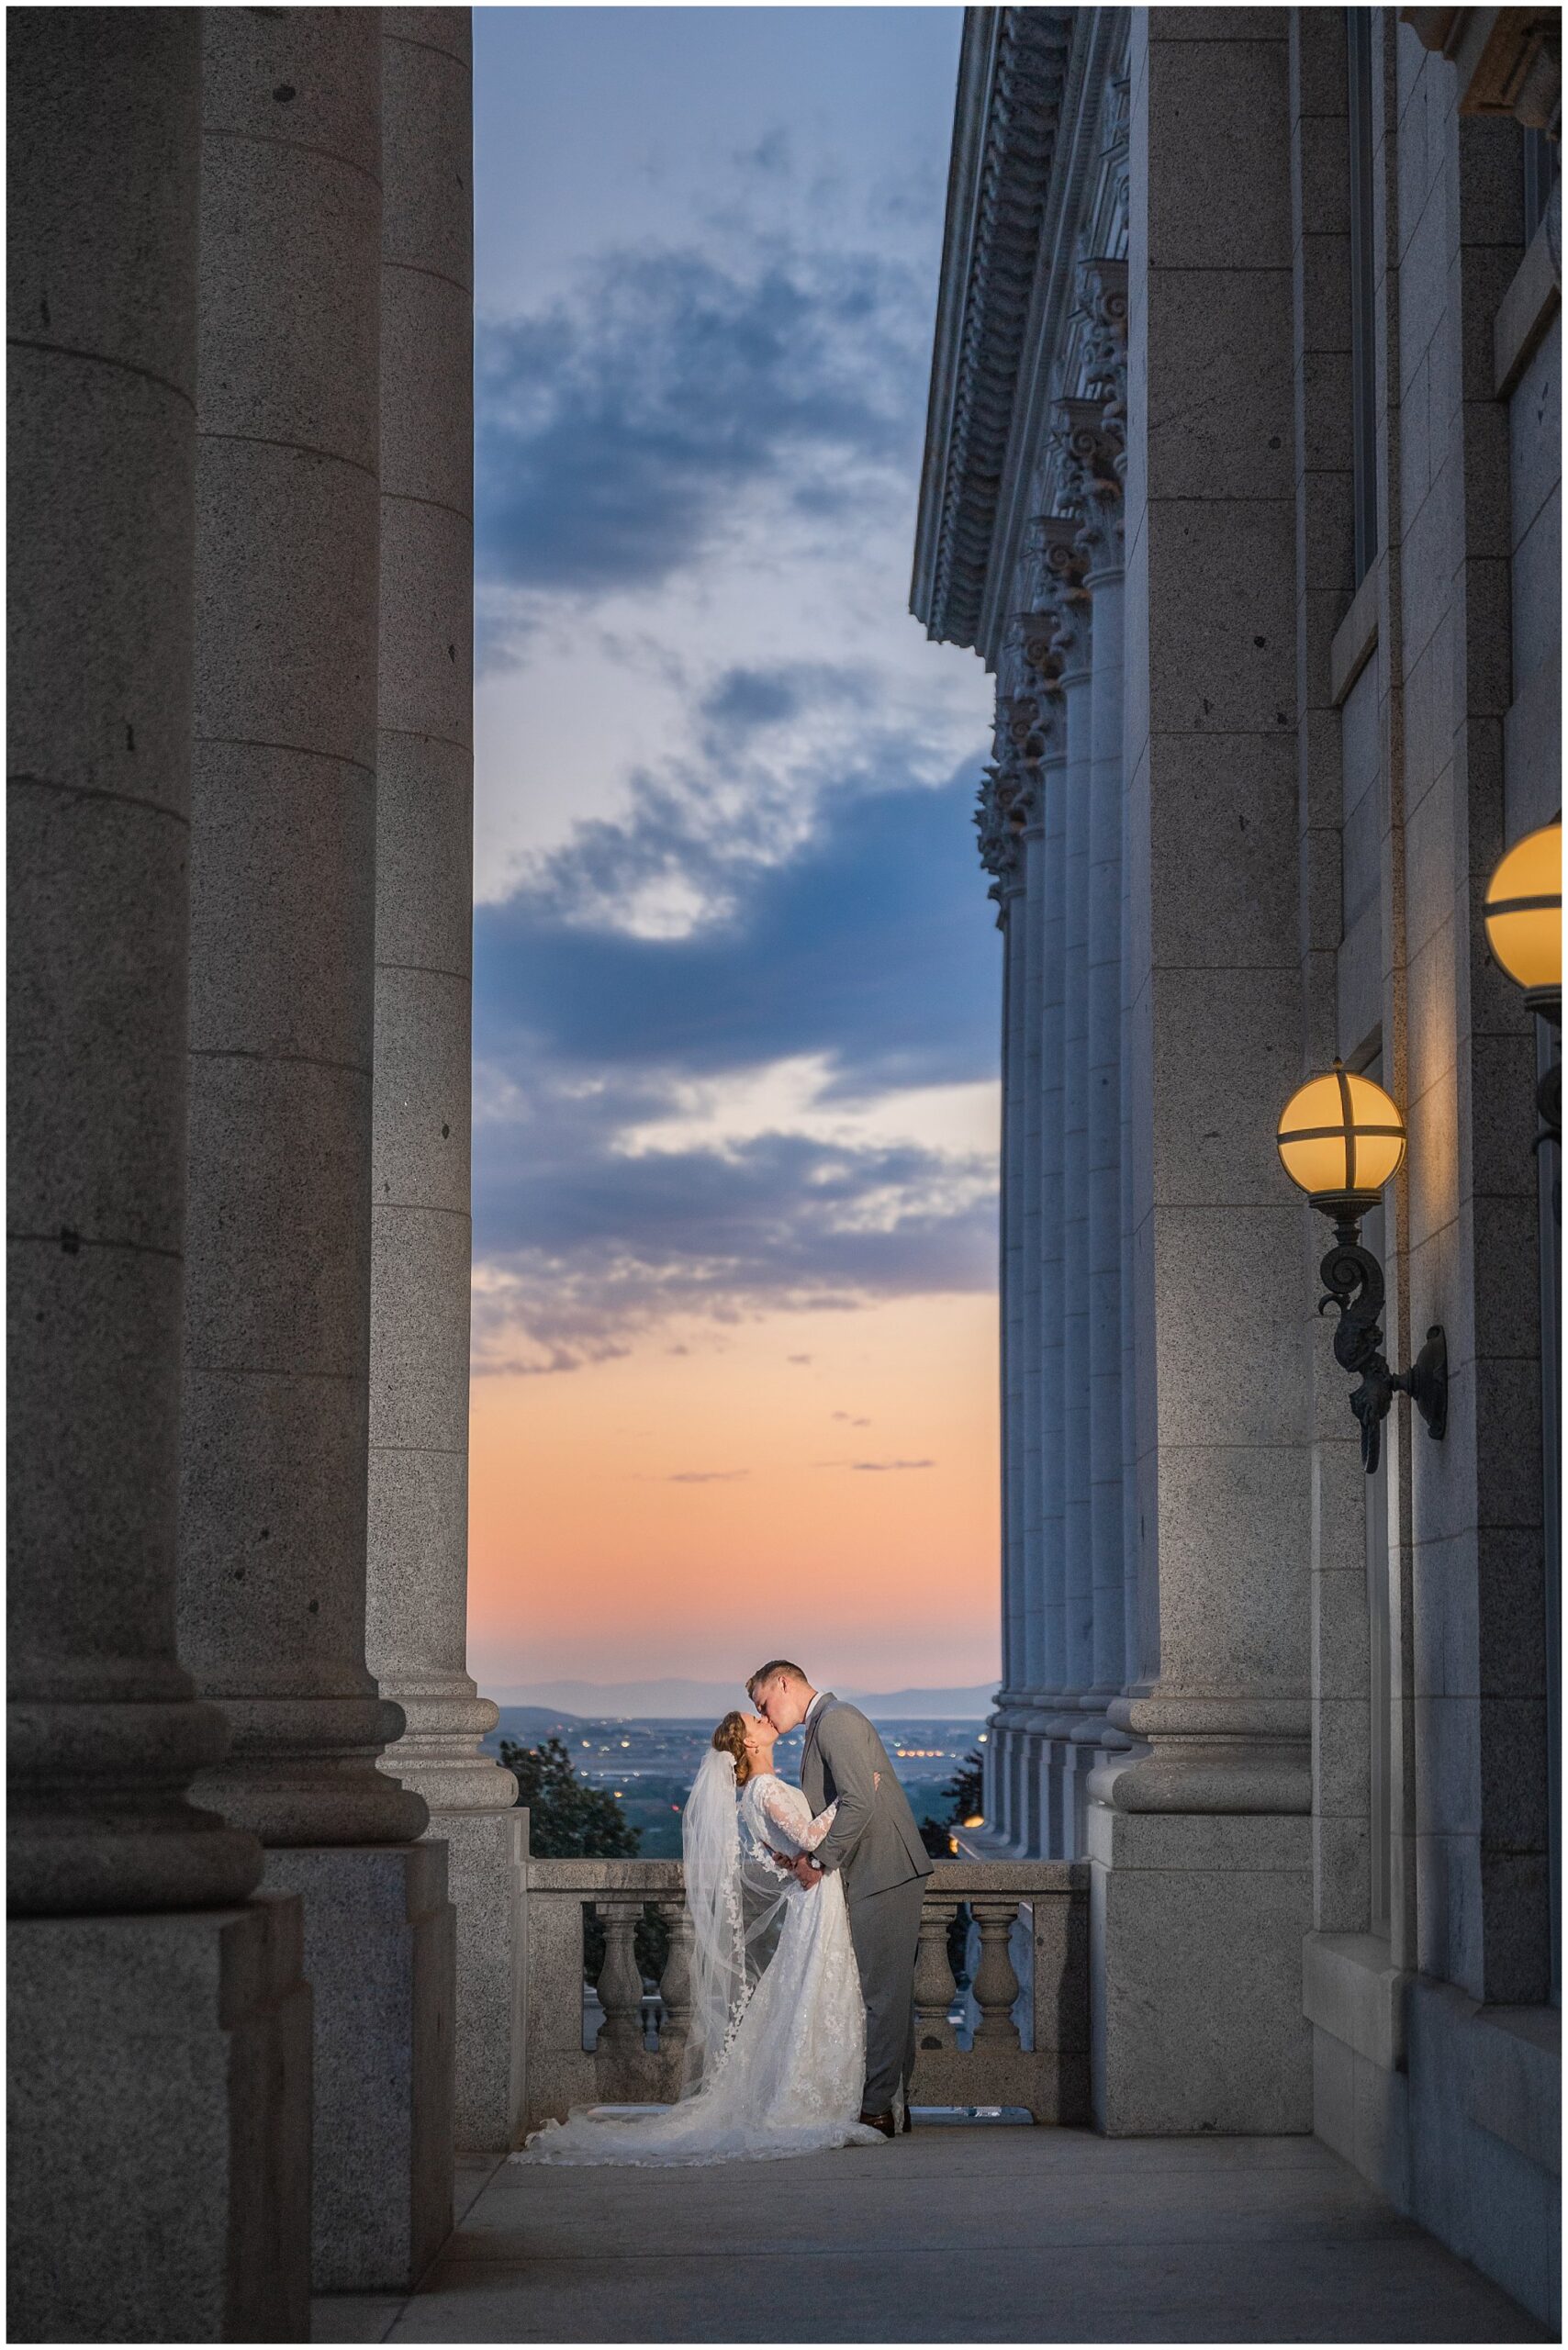 Bride and groom with long cathedral length veil sharing a romantic moment at sunset | Sunset Utah State Capitol Wedding Formal Session | Jessie and Dallin Photography